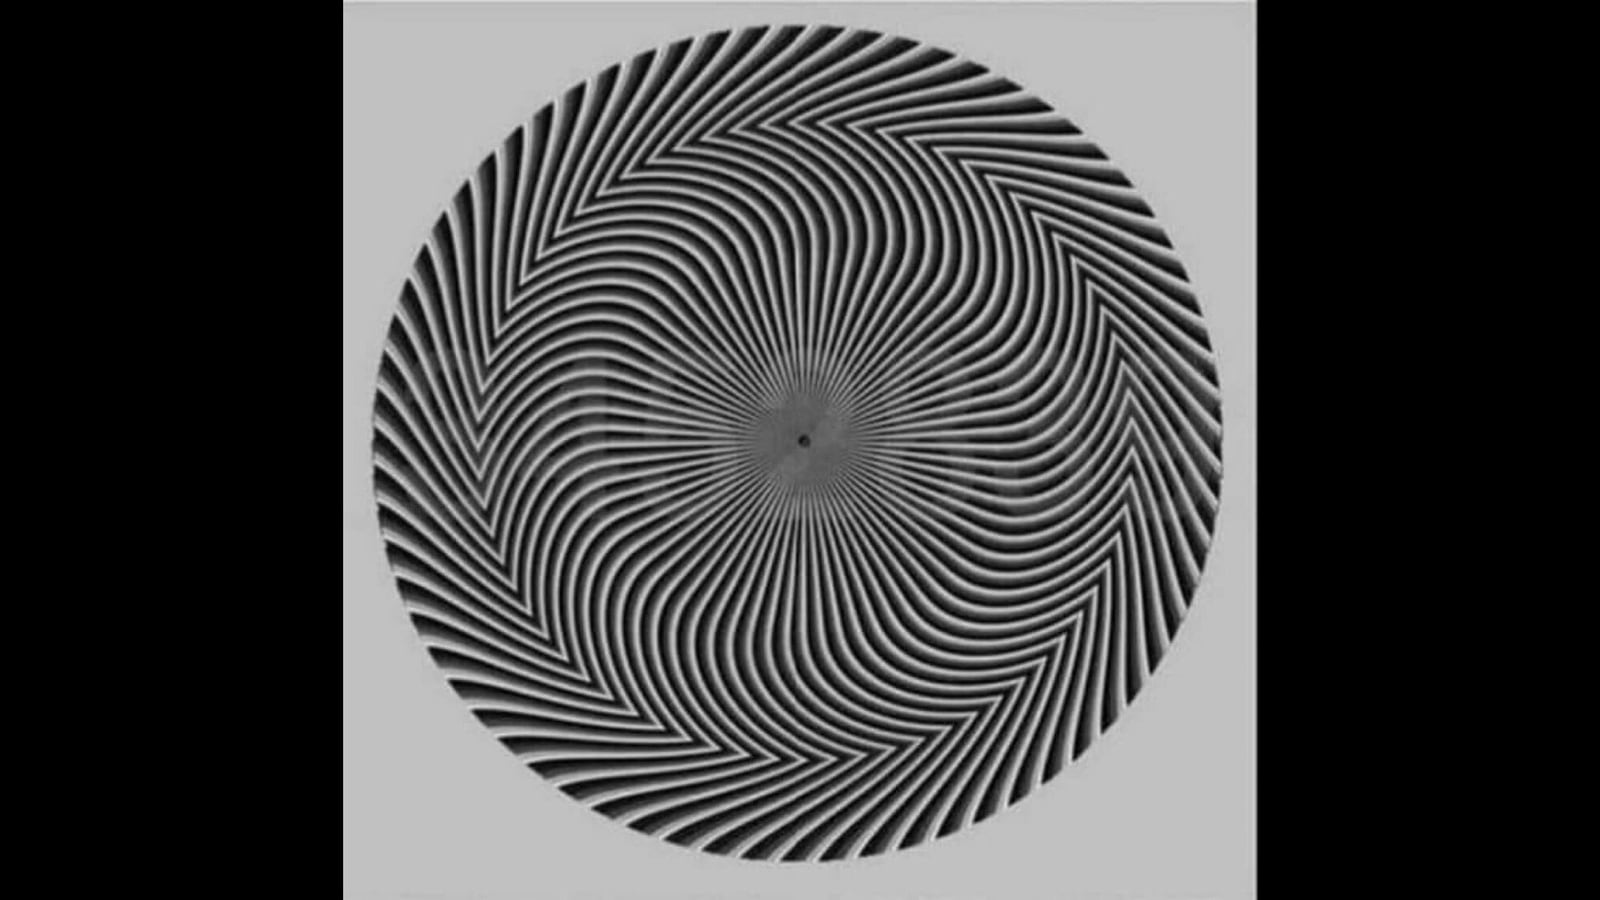 People see different numbers hidden in this viral optical illusion ...